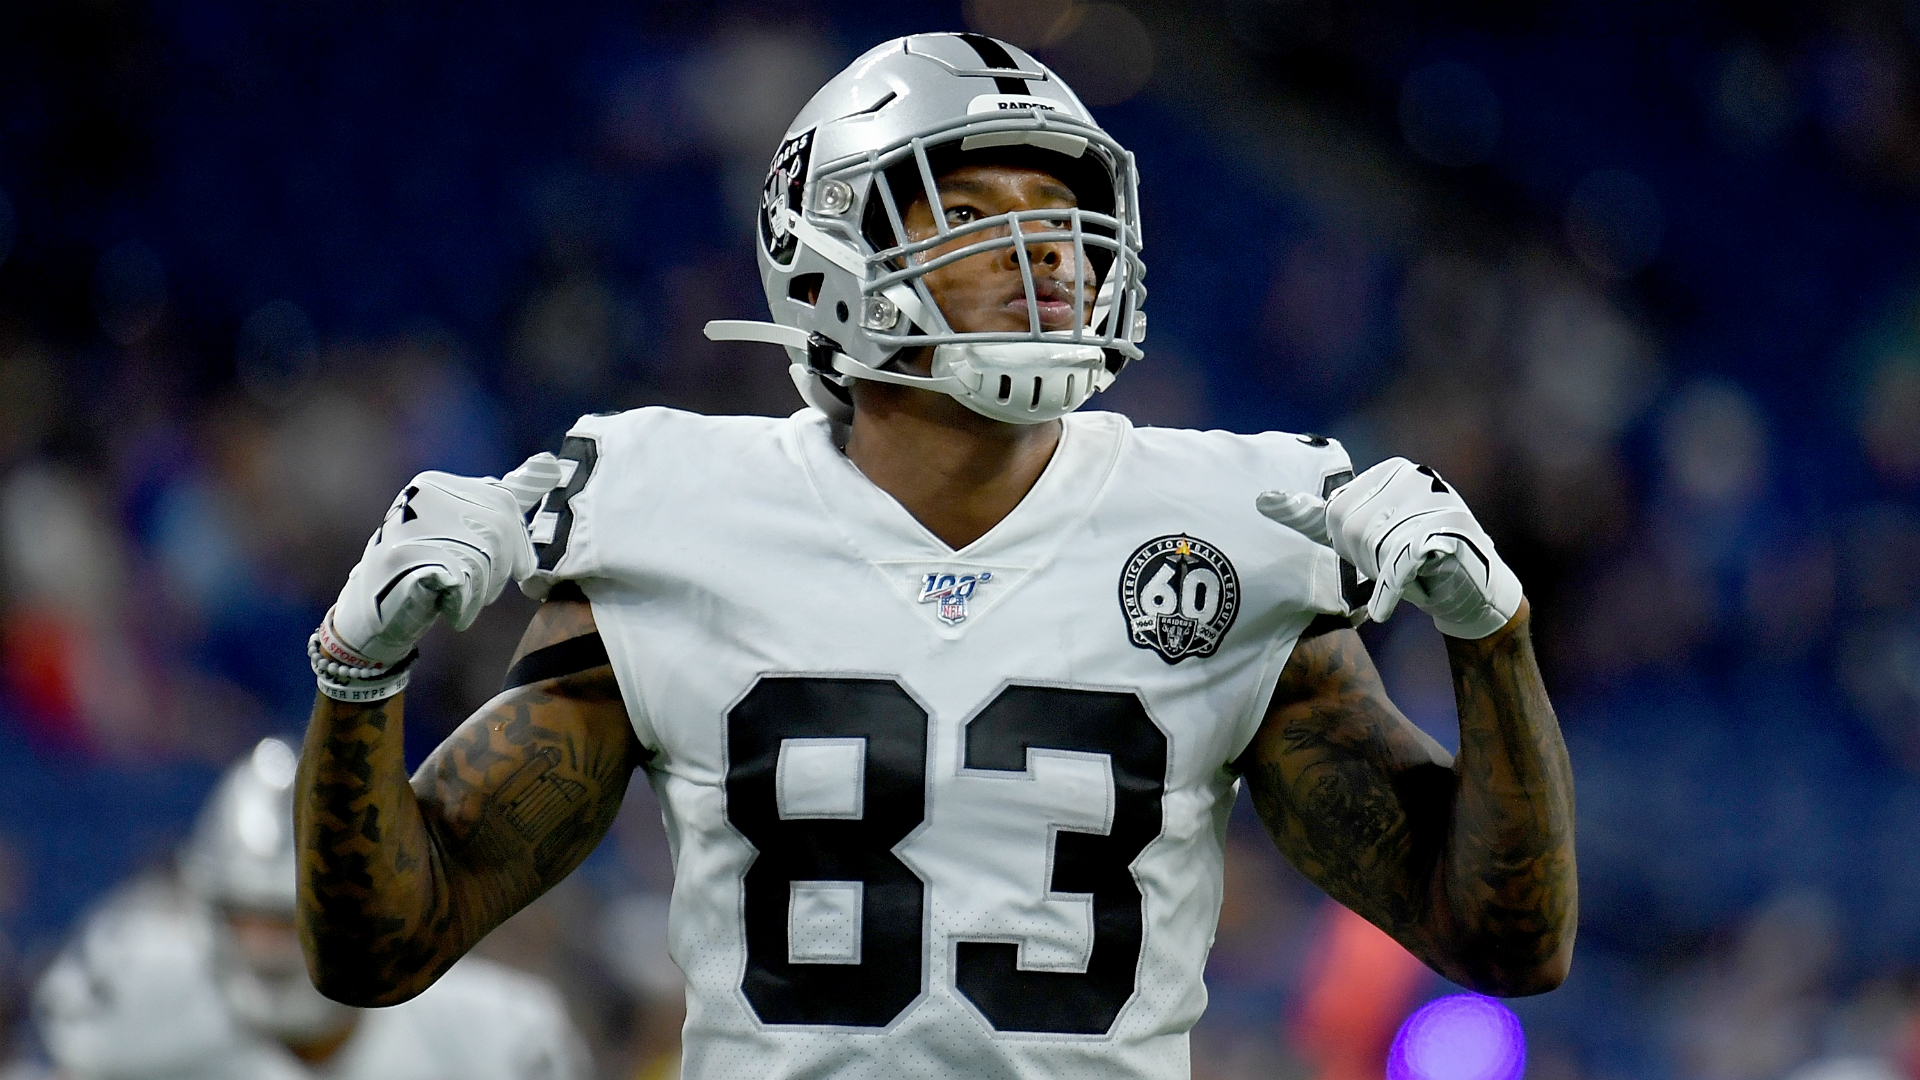 The Oakland Raiders have handed a multi-year contract extension to tight end Darren Waller, who is enjoying the best season of his career.